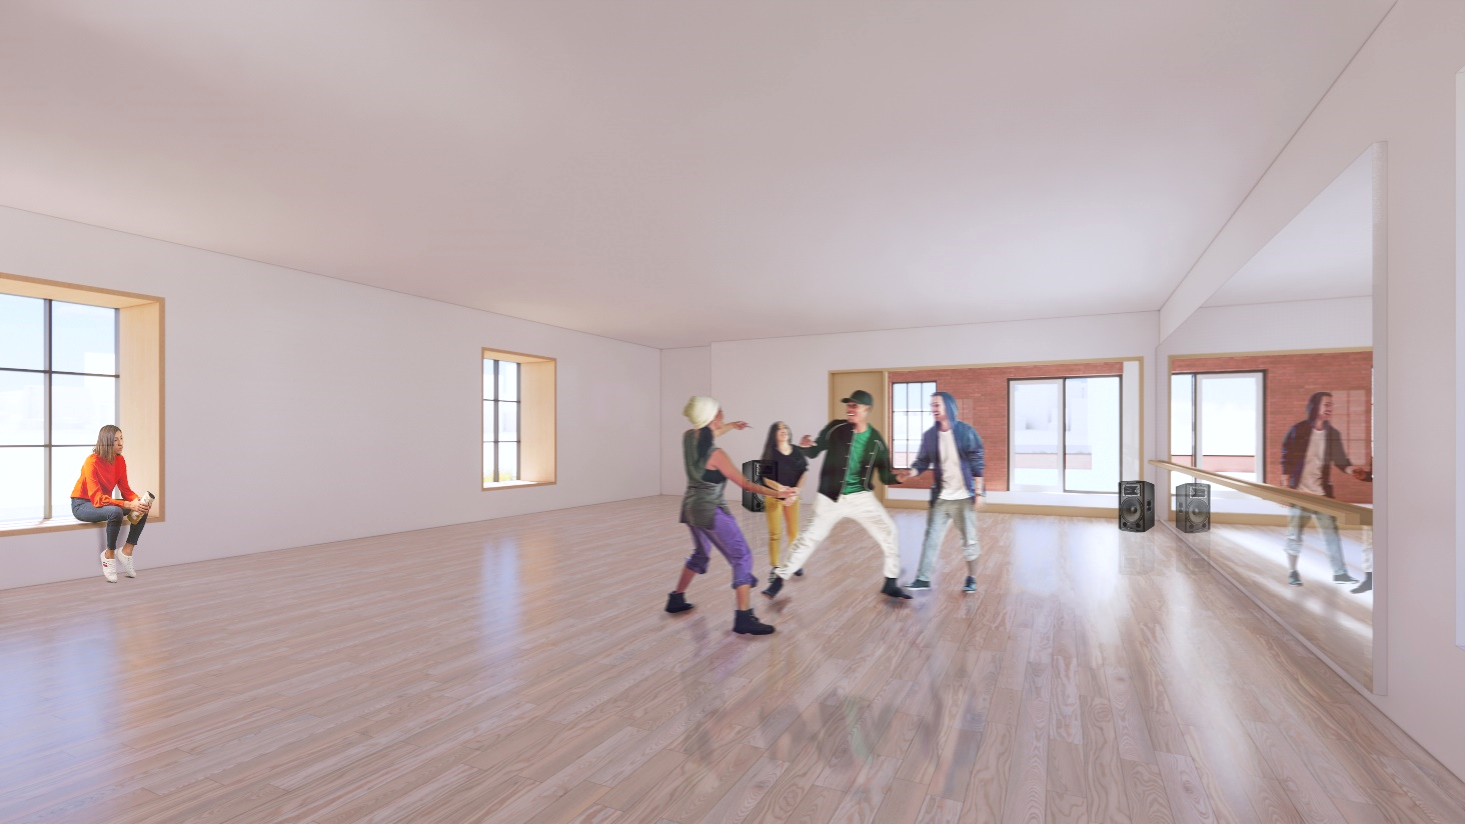 Draft design rendering of the dance Studio that includes a sprung wood floor, mirror wall, barre, and sound system.